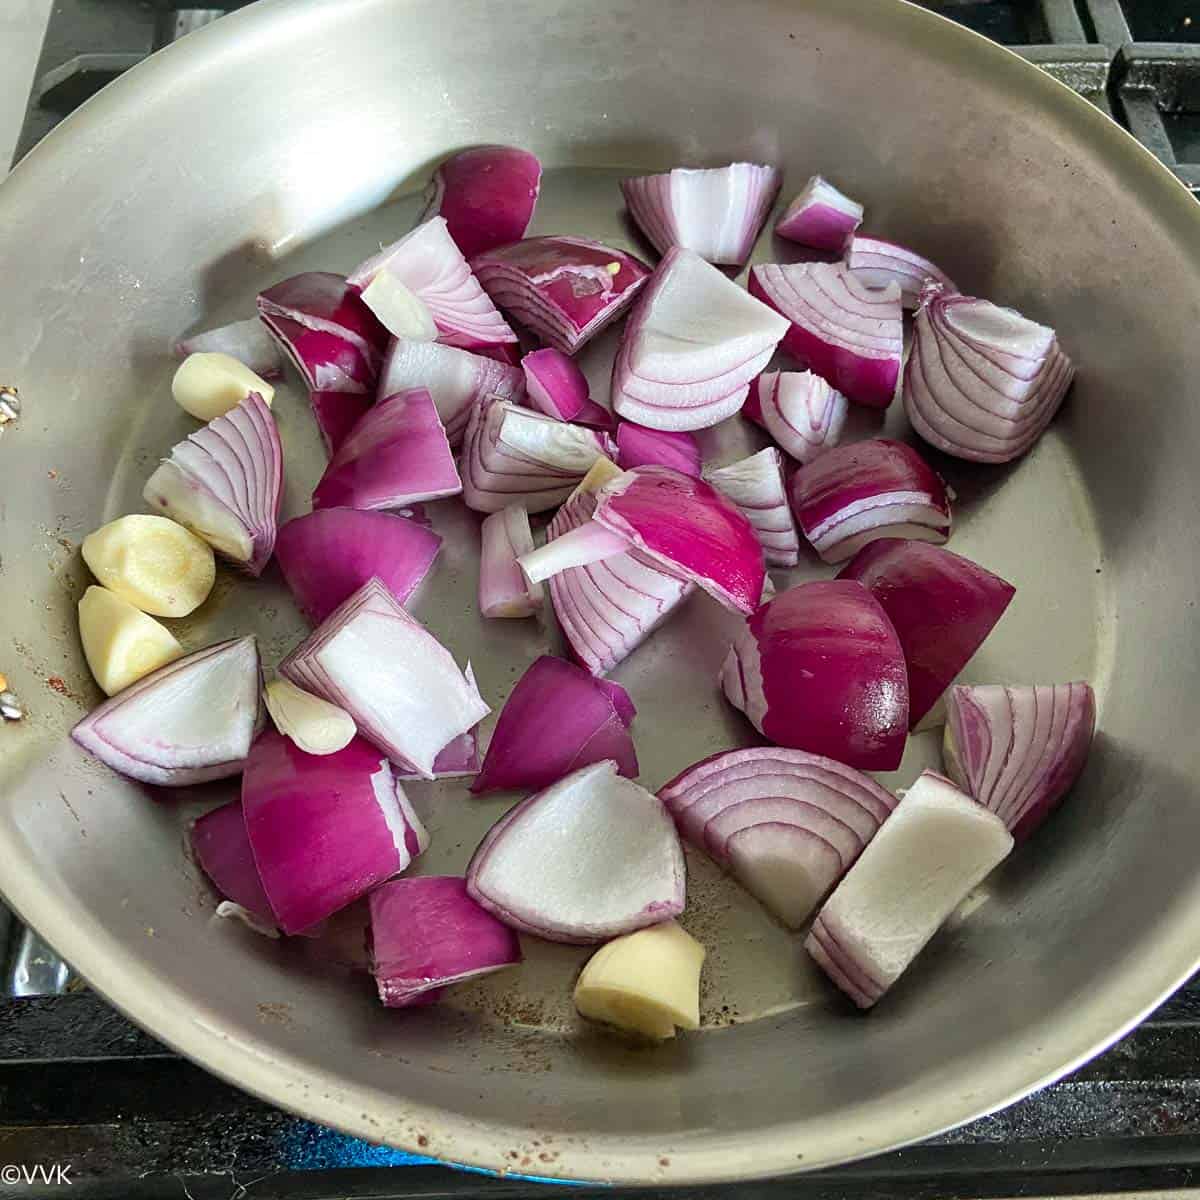 sauteing onions and garlic